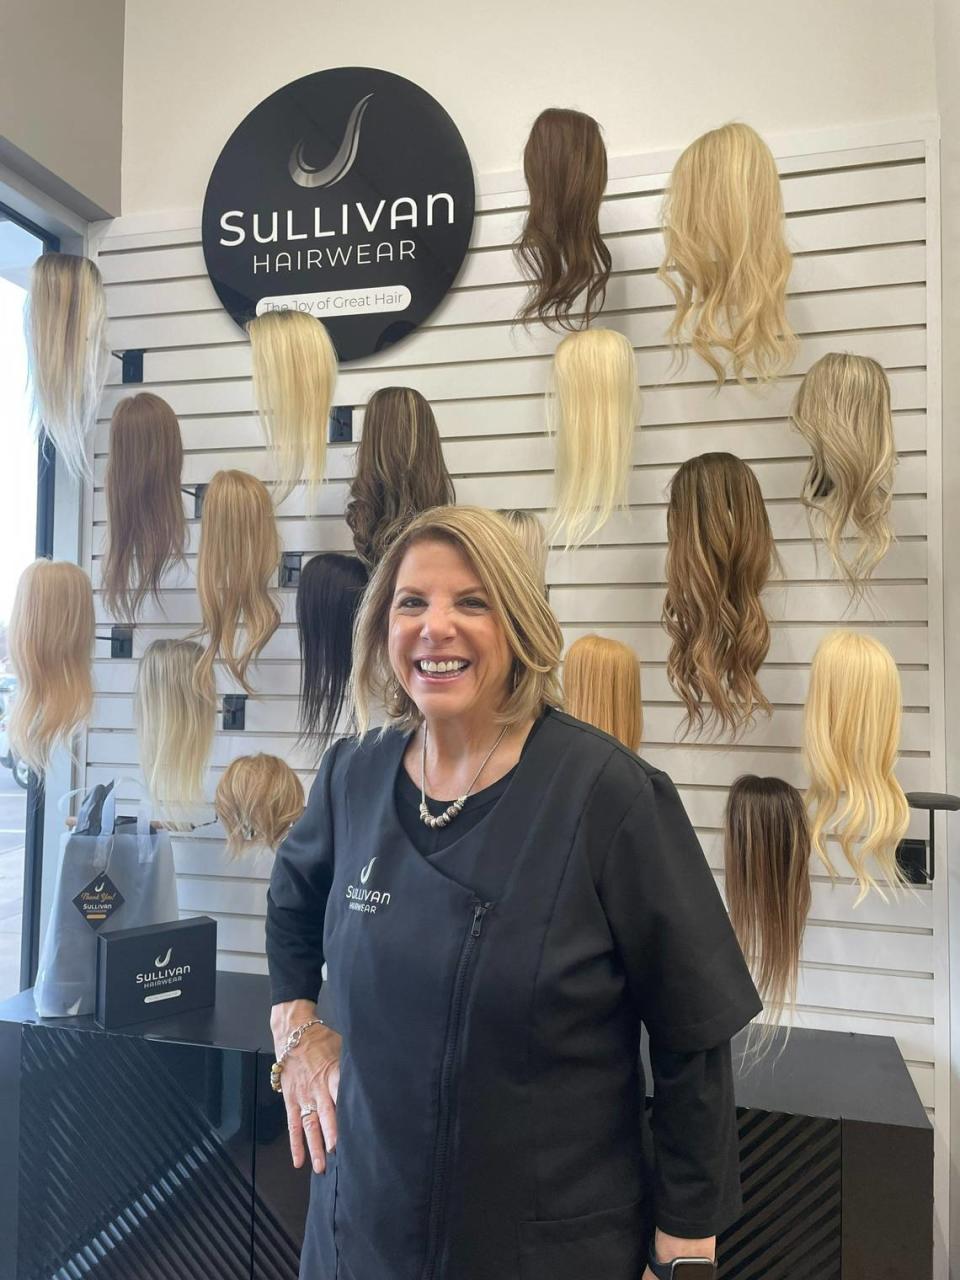 Robyn Sullivan at her new Sullivan Hairwear at the Offices at Cranbrook near 21st and Webb Road. Sullivan’s own journey fighting hair loss led her to start the business with her husband, Greg.